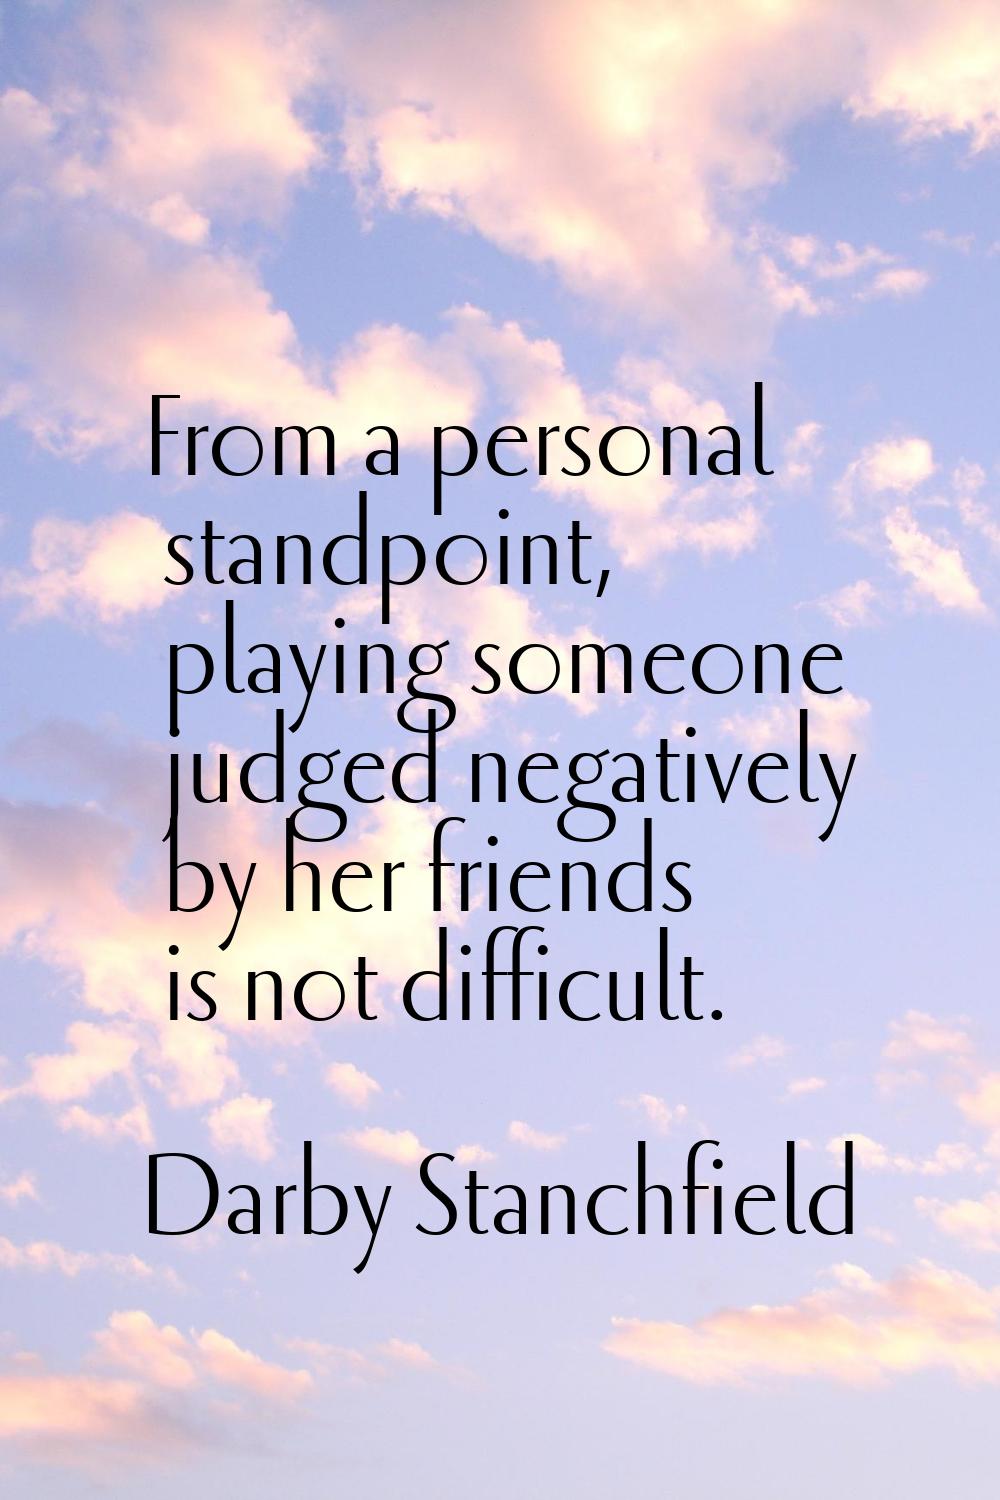 From a personal standpoint, playing someone judged negatively by her friends is not difficult.